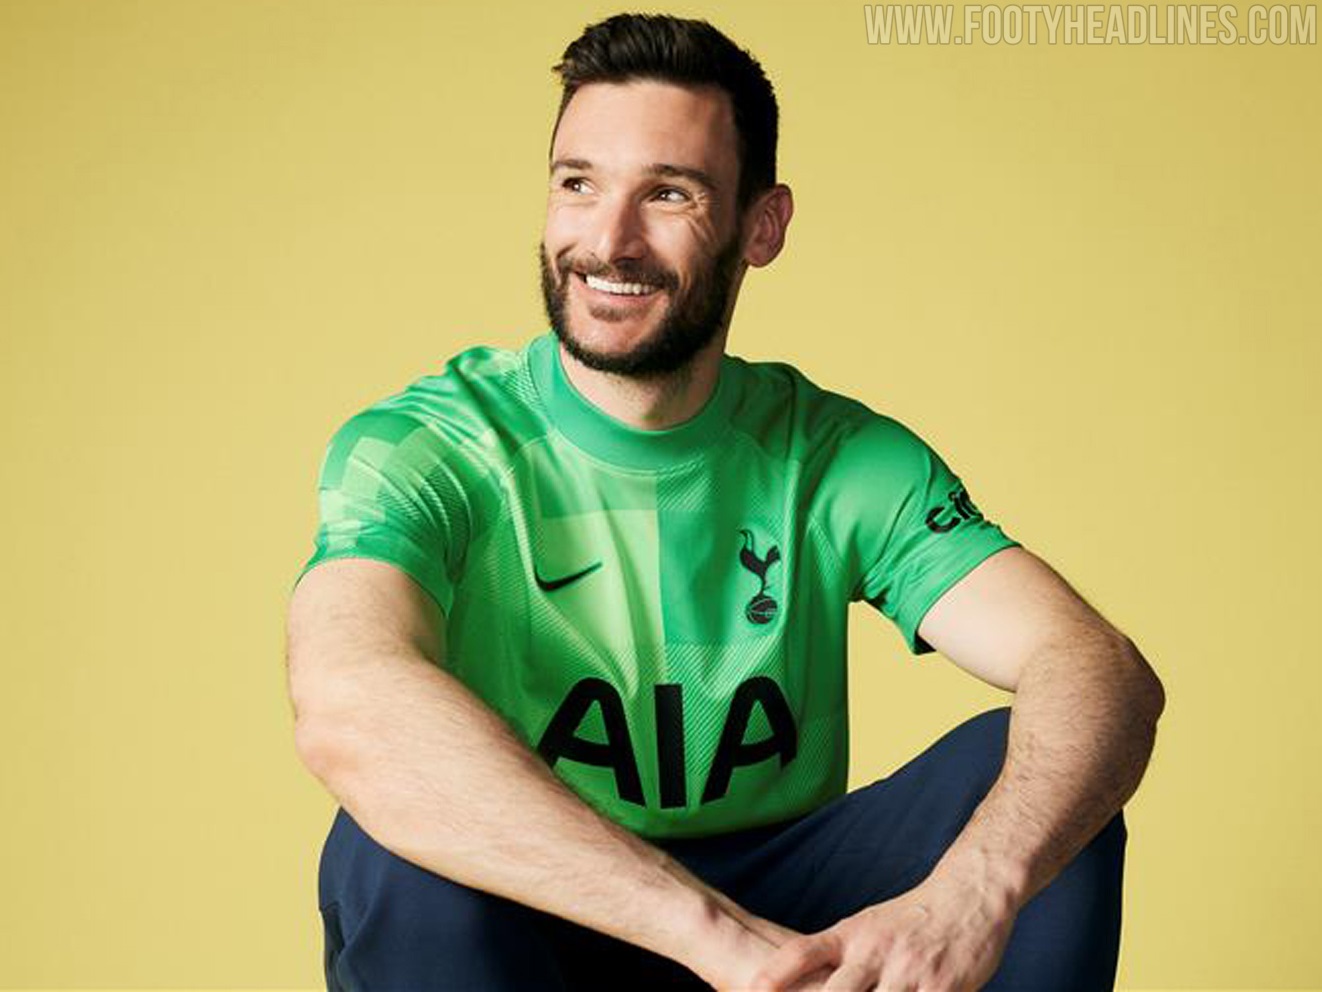 Template-less this time! Tottenham's uniquely designed 20-21 home